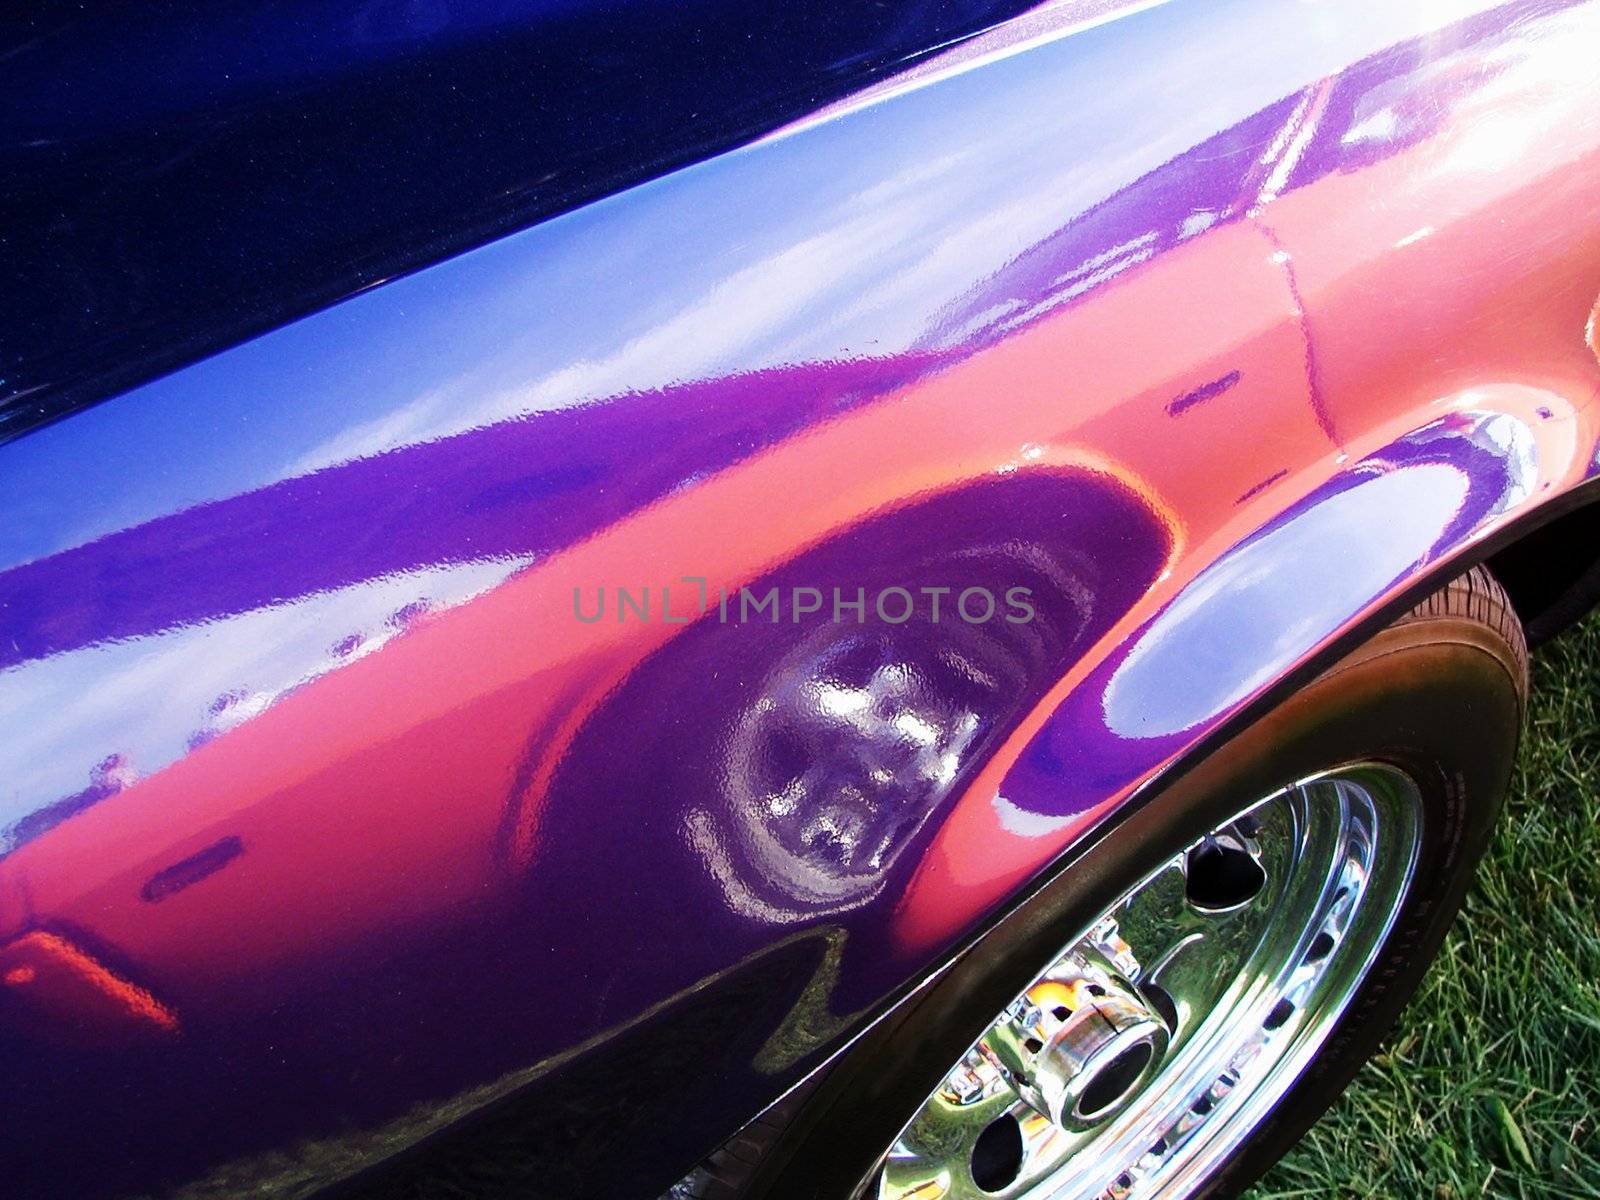 Reflection of an orange Hot rod onto the side pannel of a purple muscle car at a meet show                               